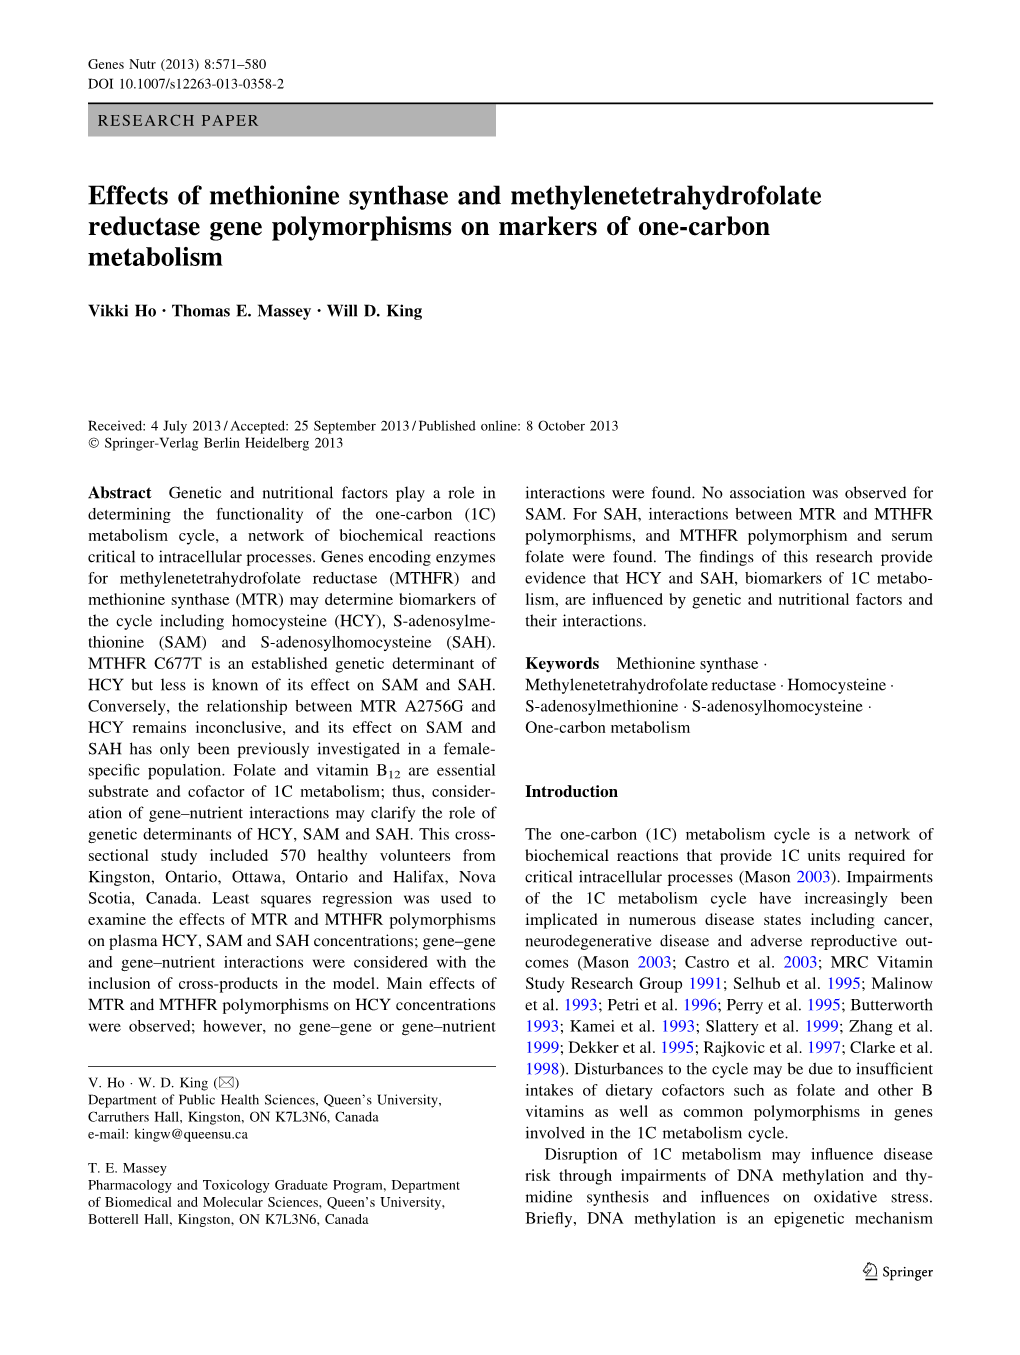 Effects of Methionine Synthase and Methylenetetrahydrofolate Reductase Gene Polymorphisms on Markers of One-Carbon Metabolism